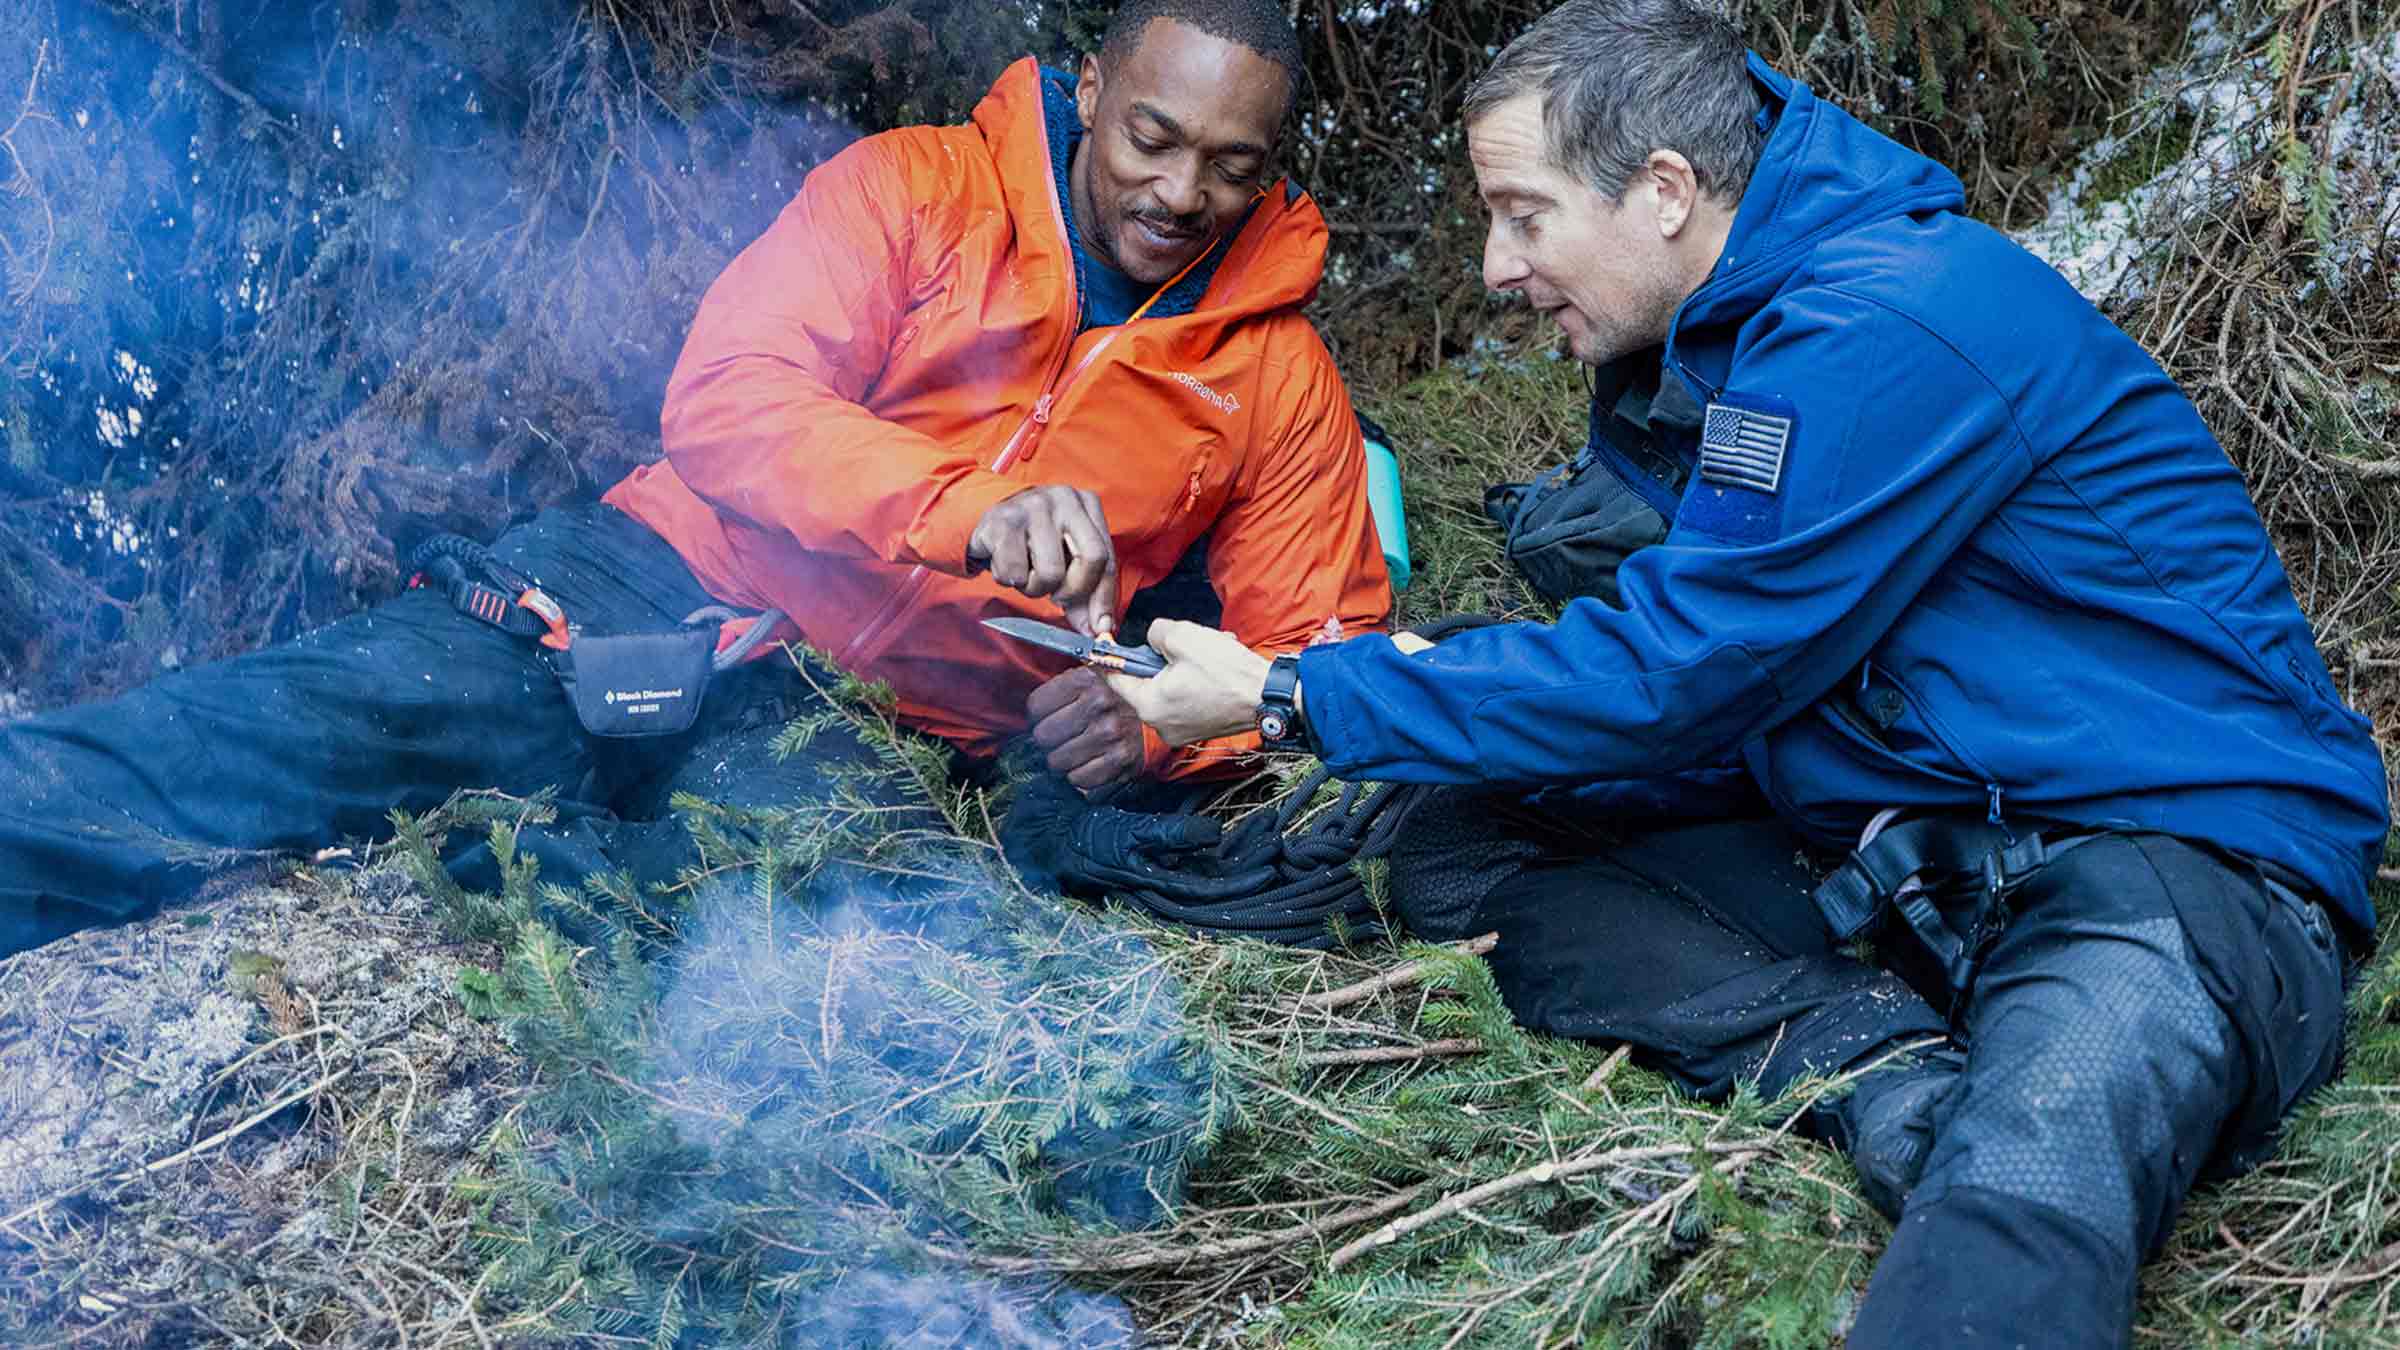 Running Wild With Bear Grylls who is in the new series? Virgin Media